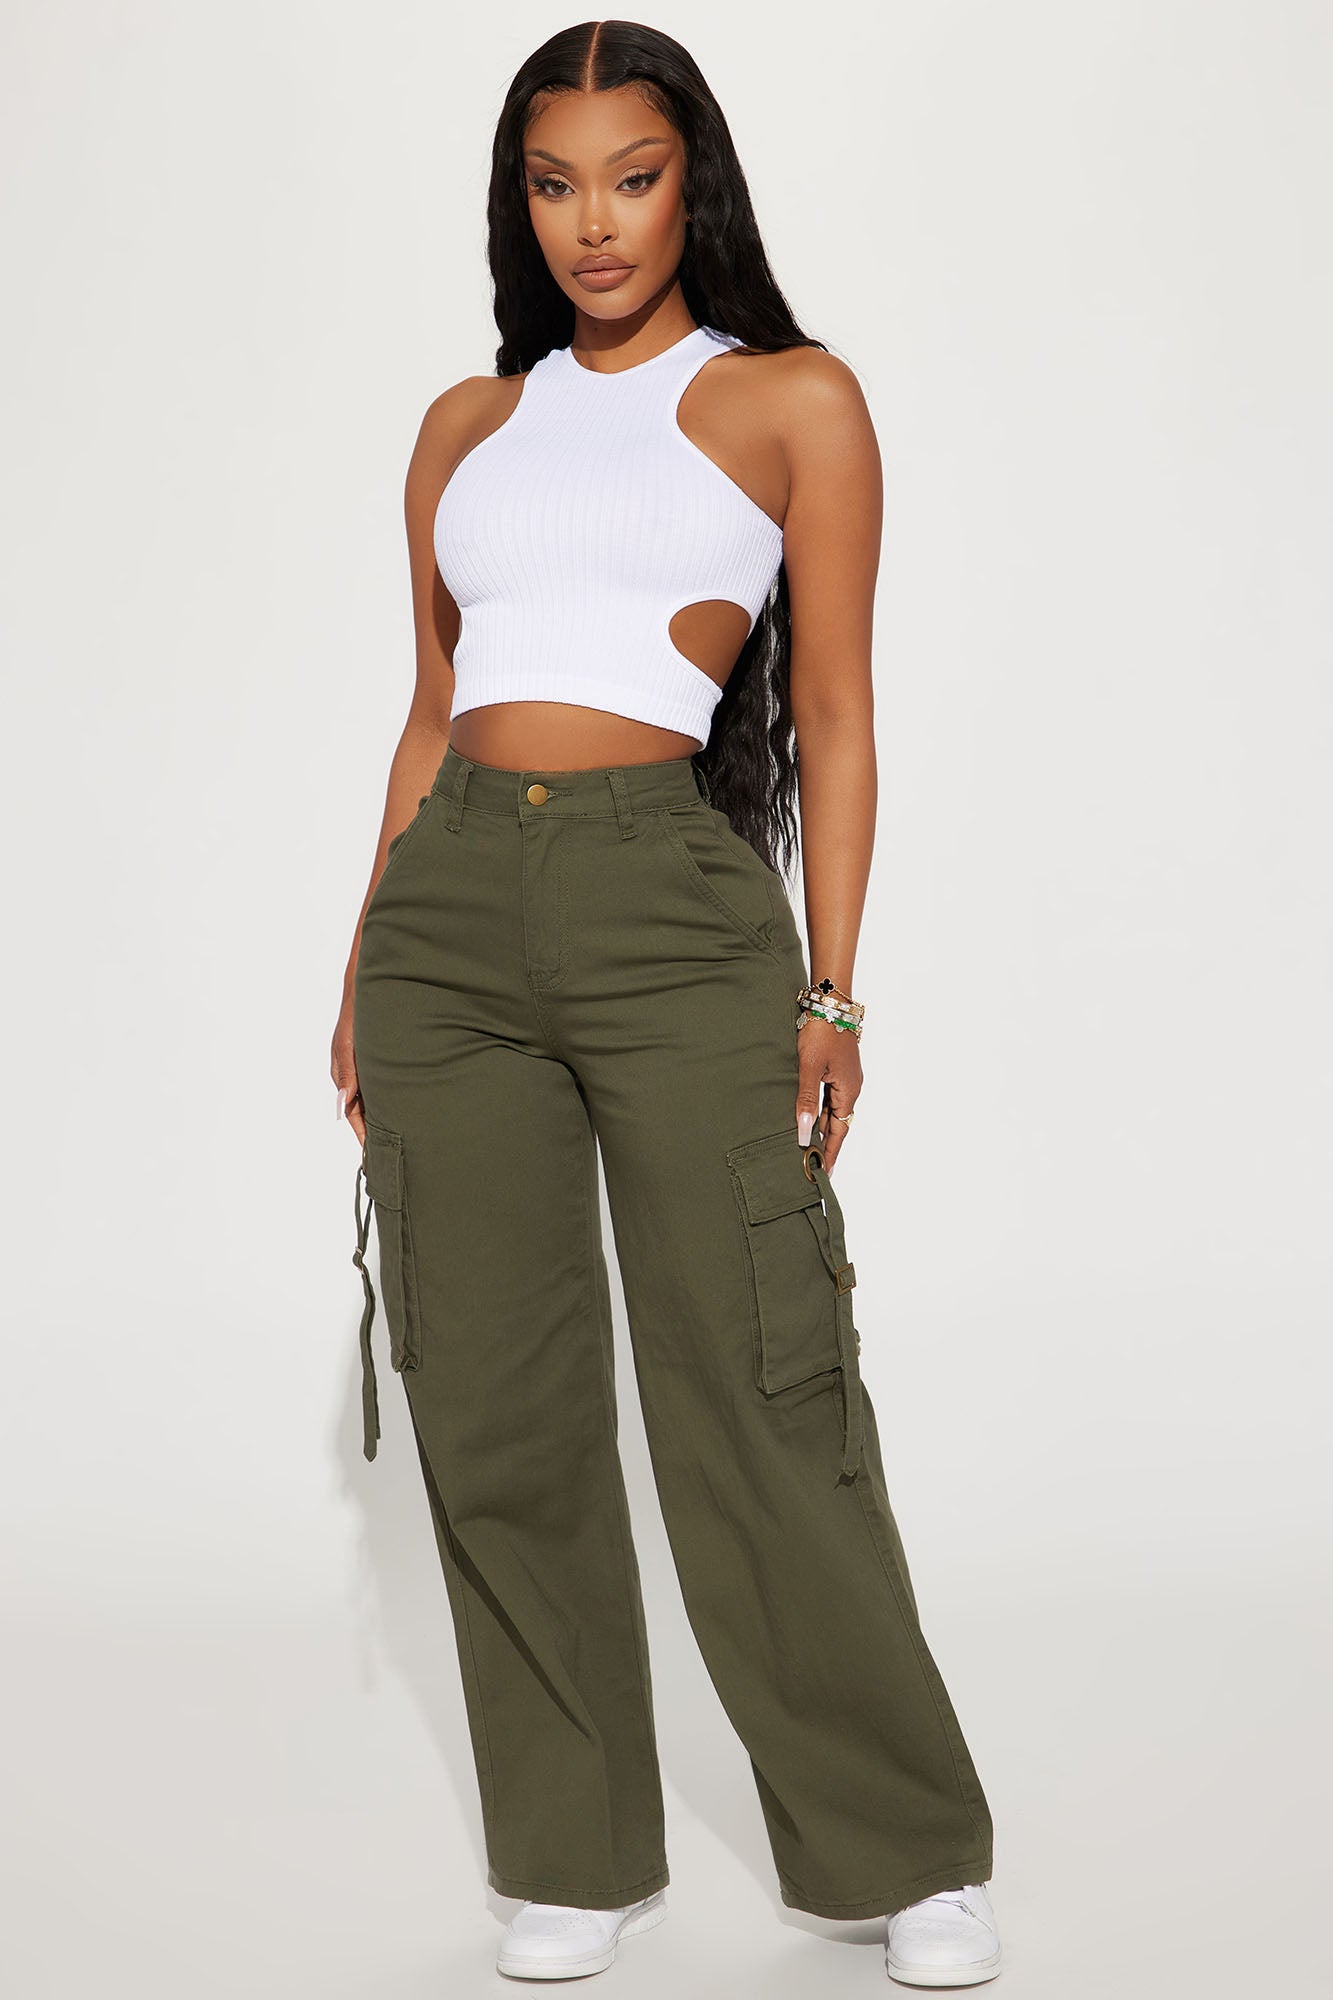 Cargo Pants Women Cute Pants Baggy Straight Wide Leg Pants with Pockets Y2k  Streetwear Army Green at Amazon Women's Clothing store